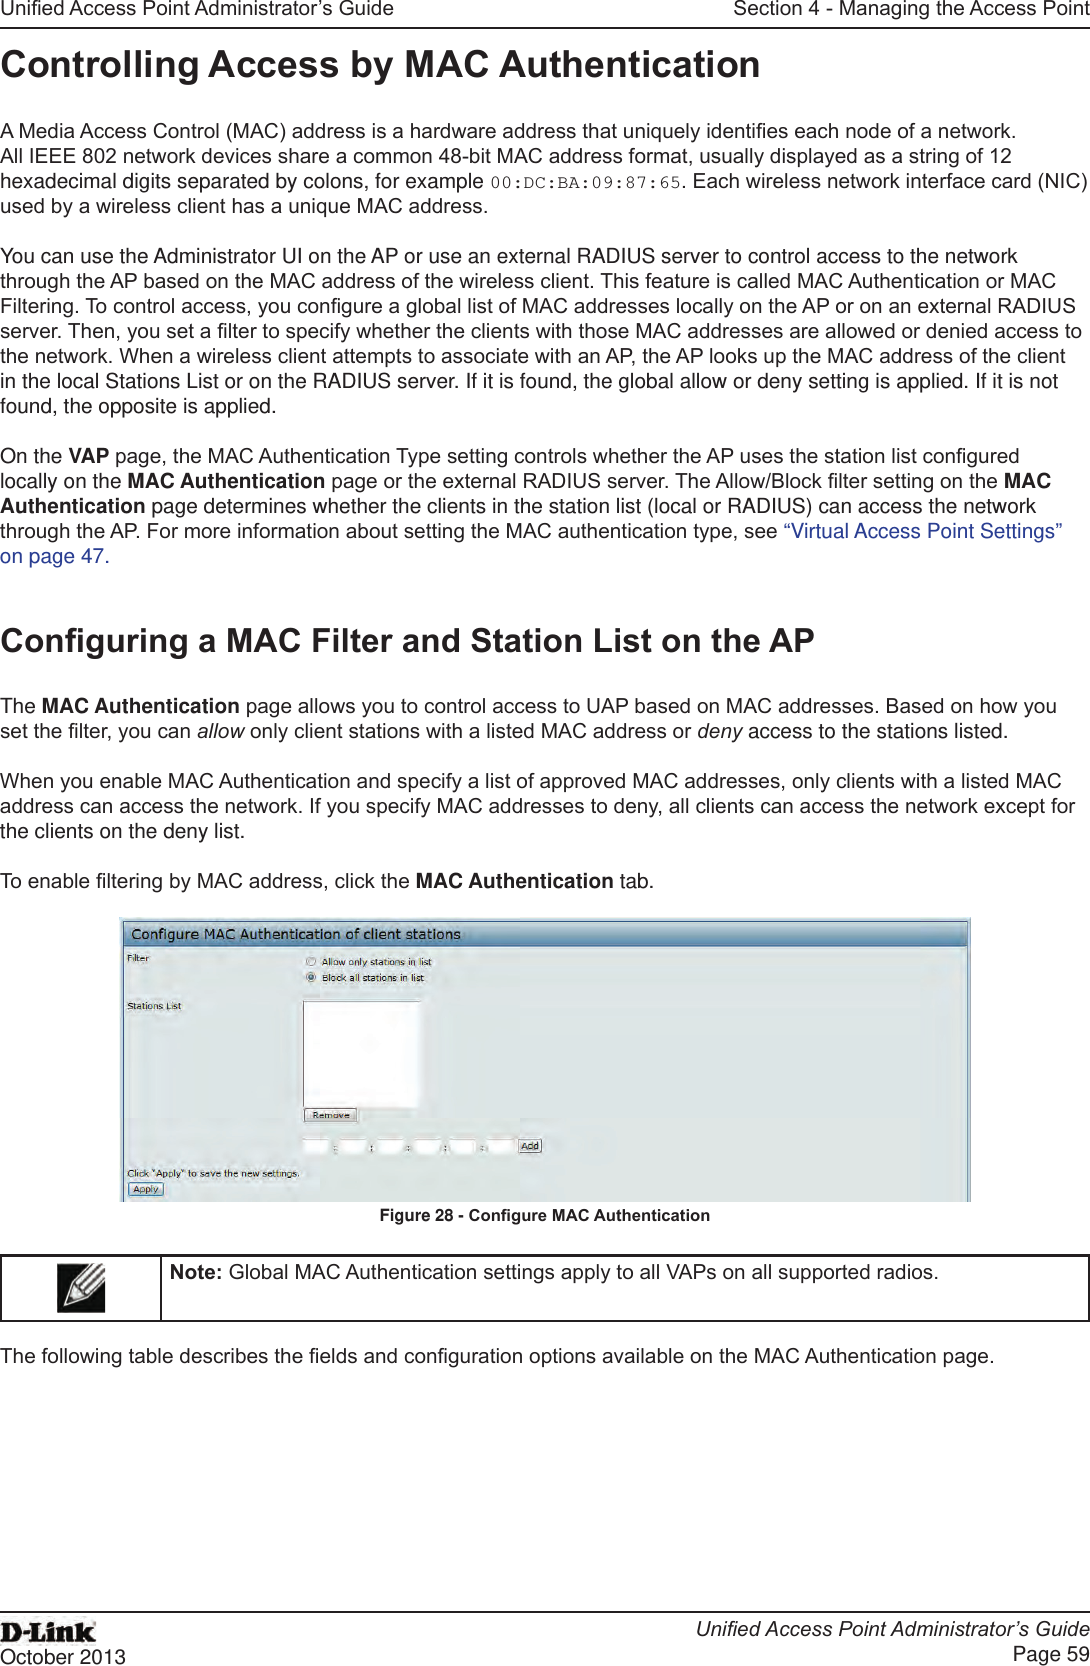 Unied Access Point Administrator’s GuideUnied Access Point Administrator’s GuidePage 59October 2013Section 4 - Managing the Access PointControlling Access by MAC AuthenticationA Media Access Control (MAC) address is a hardware address that uniquely identies each node of a network. All IEEE 802 network devices share a common 48-bit MAC address format, usually displayed as a string of 12 hexadecimal digits separated by colons, for example 00:DC:BA:09:87:65. Each wireless network interface card (NIC) used by a wireless client has a unique MAC address.You can use the Administrator UI on the AP or use an external RADIUS server to control access to the network through the AP based on the MAC address of the wireless client. This feature is called MAC Authentication or MAC Filtering. To control access, you congure a global list of MAC addresses locally on the AP or on an external RADIUS server. Then, you set a lter to specify whether the clients with those MAC addresses are allowed or denied access to the network. When a wireless client attempts to associate with an AP, the AP looks up the MAC address of the client in the local Stations List or on the RADIUS server. If it is found, the global allow or deny setting is applied. If it is not found, the opposite is applied.On the VAP page, the MAC Authentication Type setting controls whether the AP uses the station list congured locally on the MAC Authentication page or the external RADIUS server. The Allow/Block lter setting on the MAC Authentication page determines whether the clients in the station list (local or RADIUS) can access the network through the AP. For more information about setting the MAC authentication type, see “Virtual Access Point Settings” on page 47.Conguring a MAC Filter and Station List on the APThe MAC Authentication page allows you to control access to UAP based on MAC addresses. Based on how you set the lter, you can allow only client stations with a listed MAC address or deny access to the stations listed.When you enable MAC Authentication and specify a list of approved MAC addresses, only clients with a listed MAC address can access the network. If you specify MAC addresses to deny, all clients can access the network except for the clients on the deny list.To enable ltering by MAC address, click the MAC Authentication tab.Figure 28 - Congure MAC AuthenticationNote: Global MAC Authentication settings apply to all VAPs on all supported radios.The following table describes the elds and conguration options available on the MAC Authentication page.